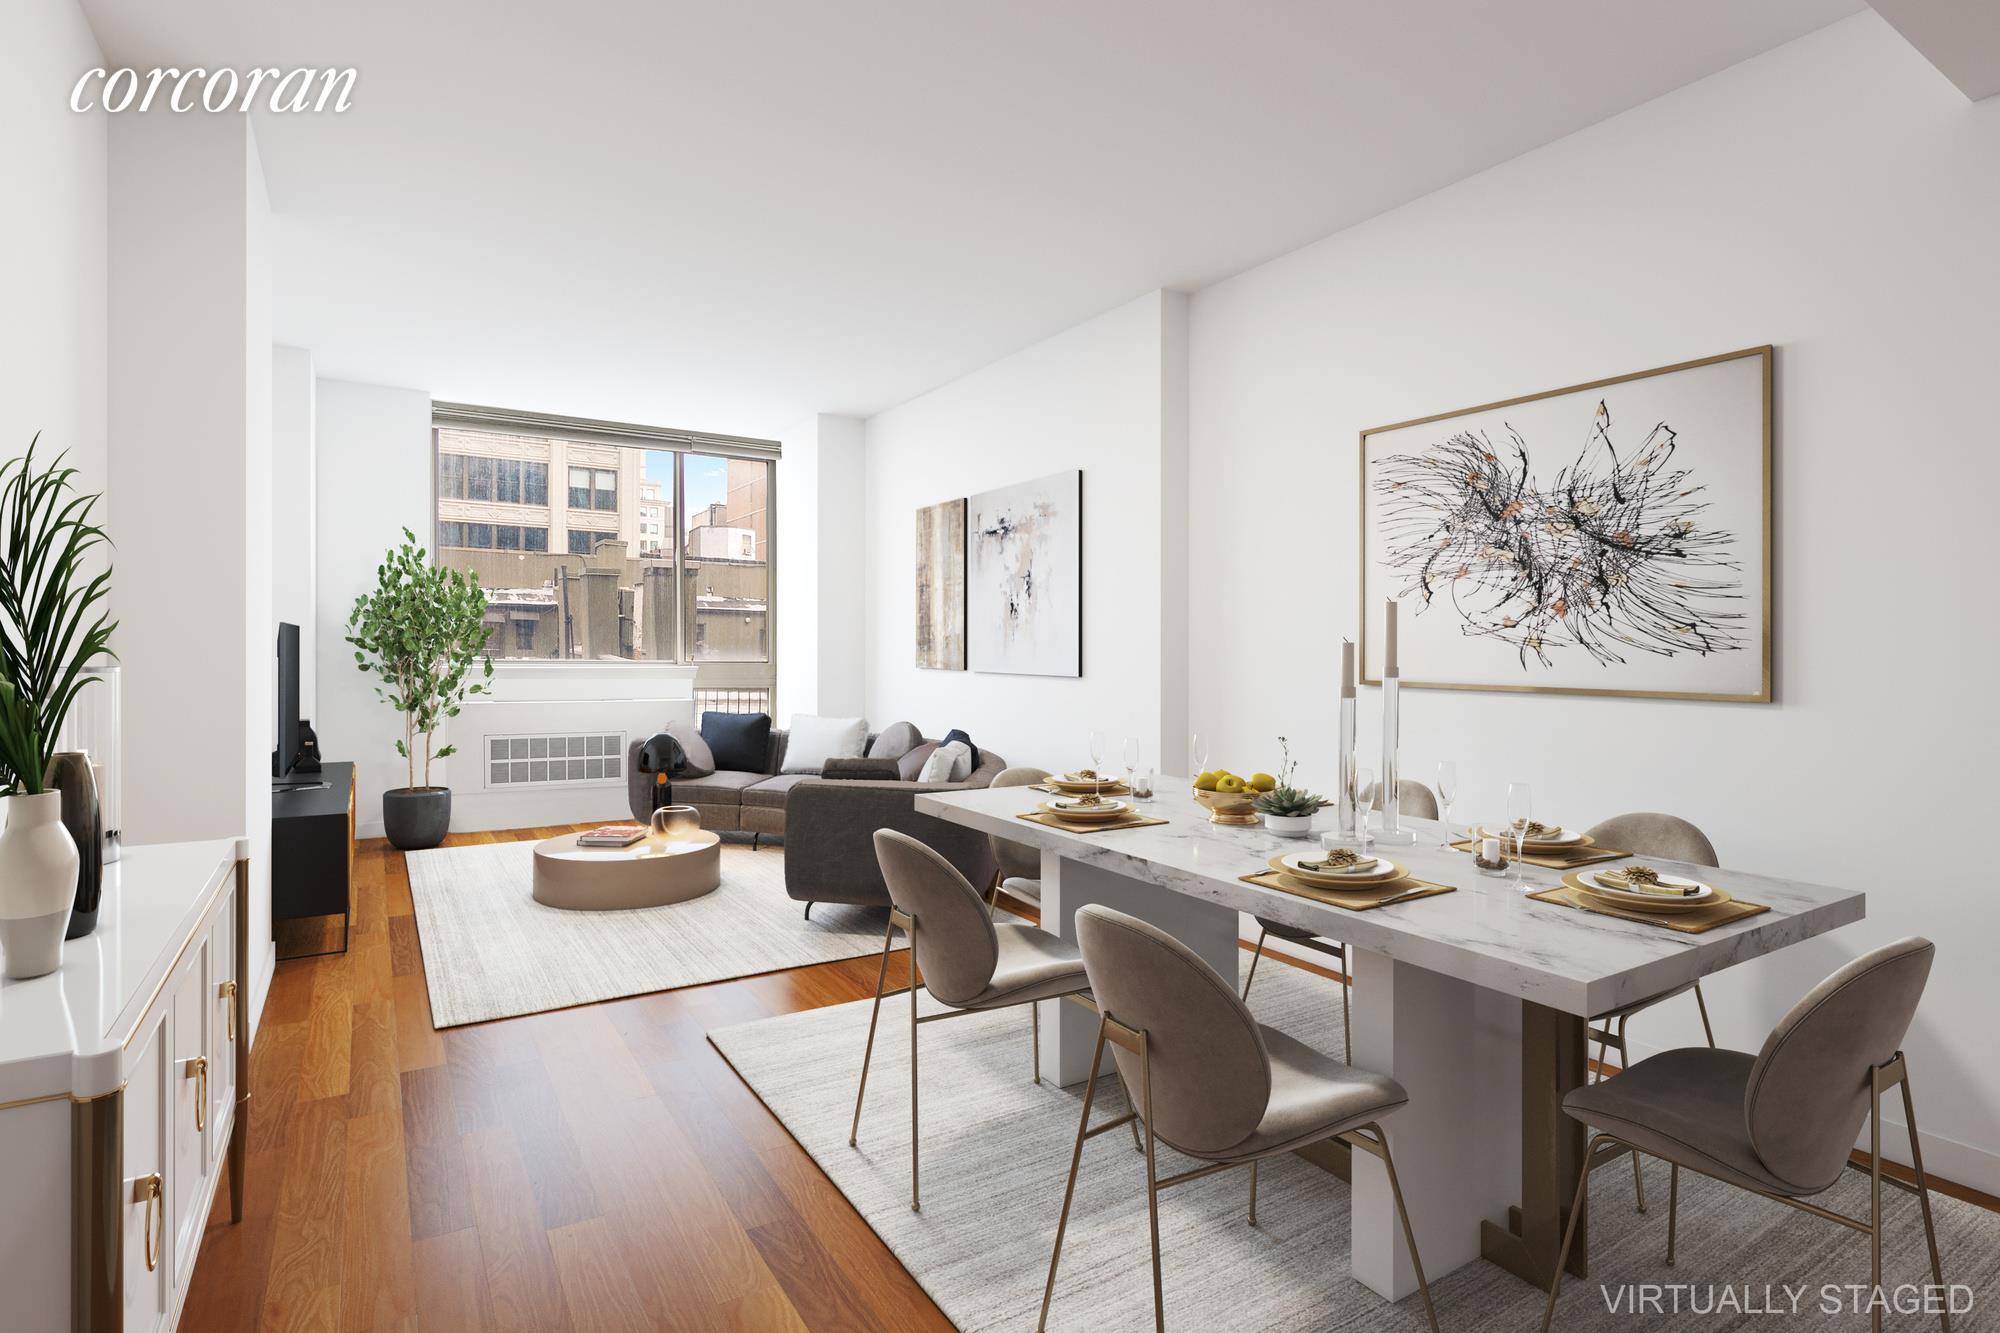 Serenity on 23rd Street. Residence 6A at the notable Crossing 23rd Condominium is a 655 SF 1 bedroom 1 bathroom apartment facing North for all day sunlight and ultimate quiet.